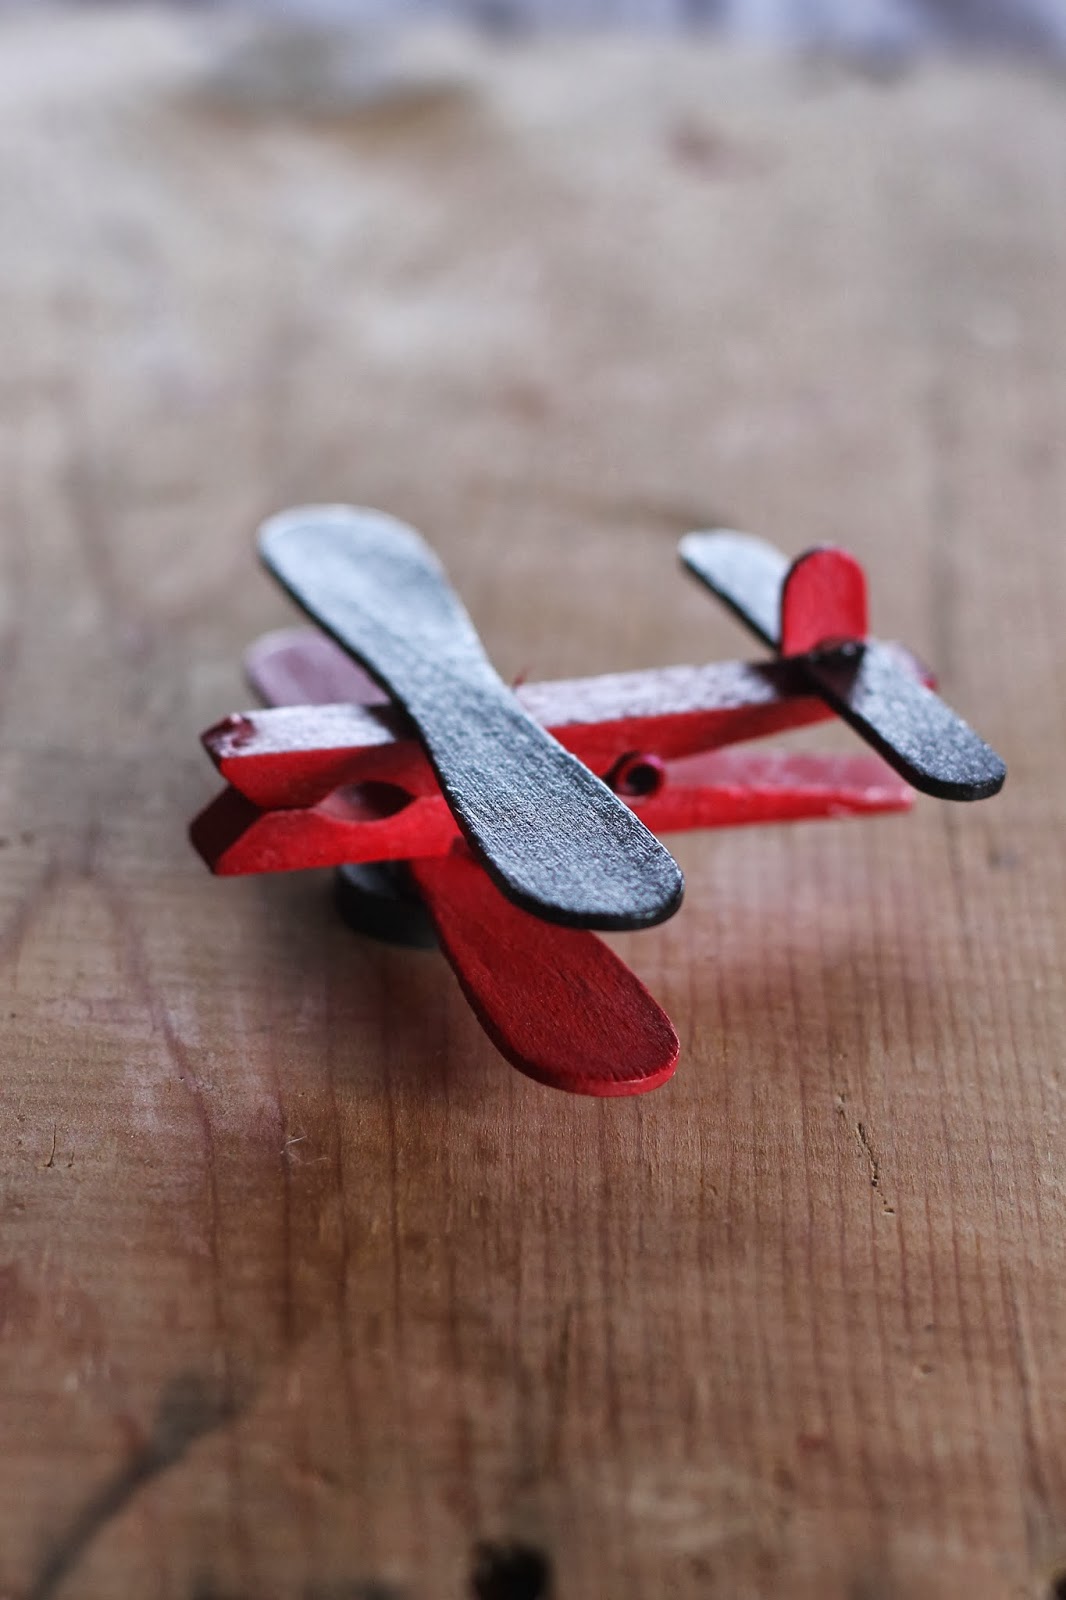 11 Easy DIY Clothespin Crafts To Excite Your Kids - Shelterness